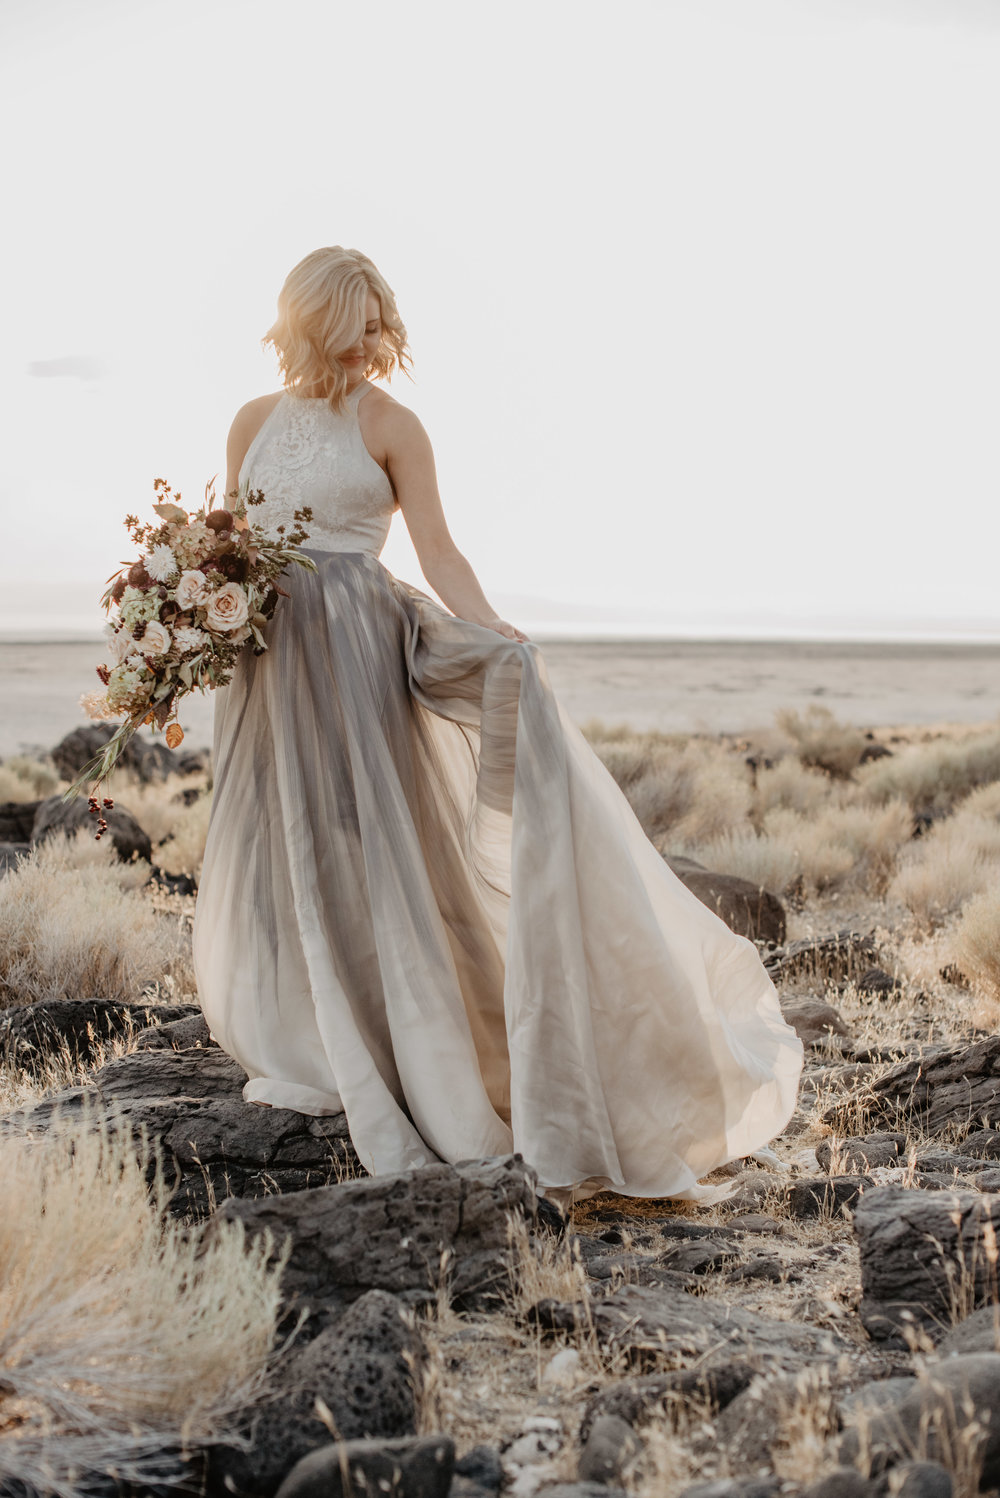 Jocilyn Bennett Photography | Destination Wedding Photographer | Elopement Wedding Photographer | National Park Elopement Photography | Capturing raw and genuine emotion | Utah Photographer | Utah wedding Photographer | National Park Weddings | Adventure Photographer | Bohemian photography | Bohemian wedding | Spiral Jetty photography | Bridals at the Spiral Jetty | Hand painted wedding gown